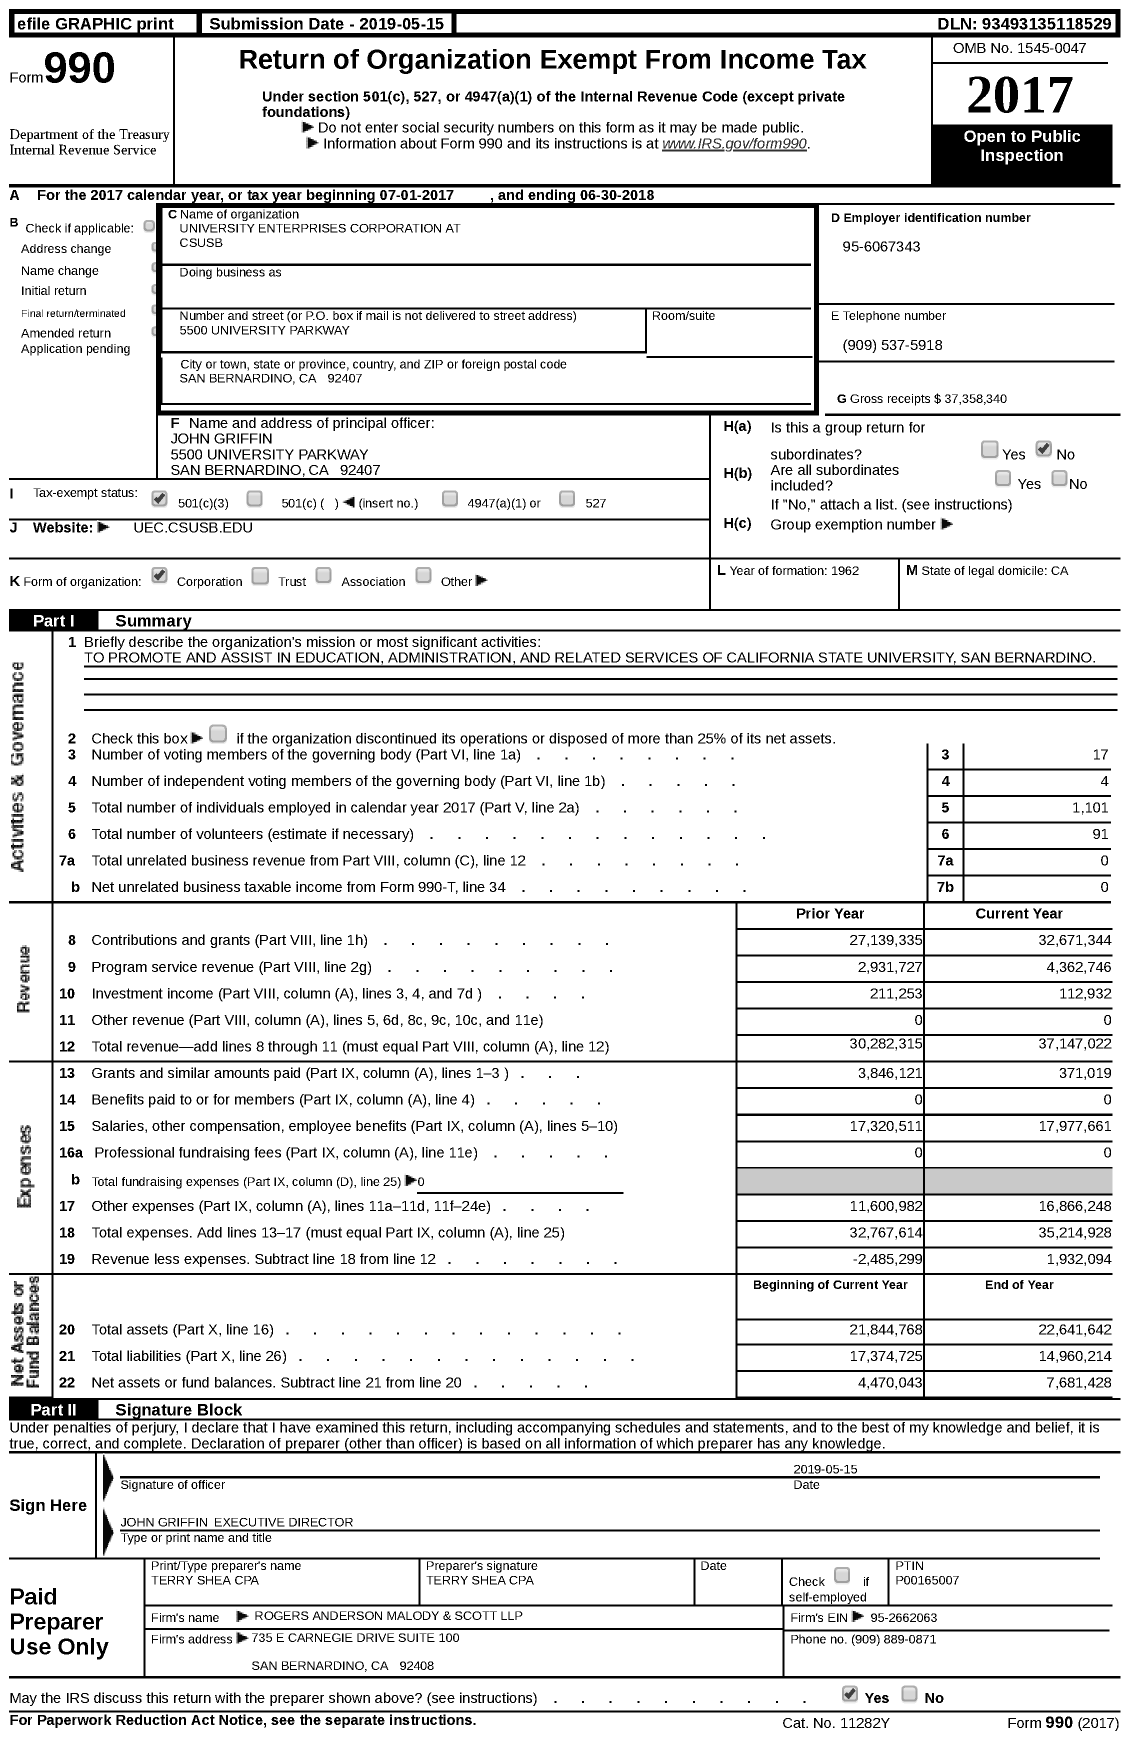 Image of first page of 2017 Form 990 for University Enterprises Corporation at CSUSB (UEC)